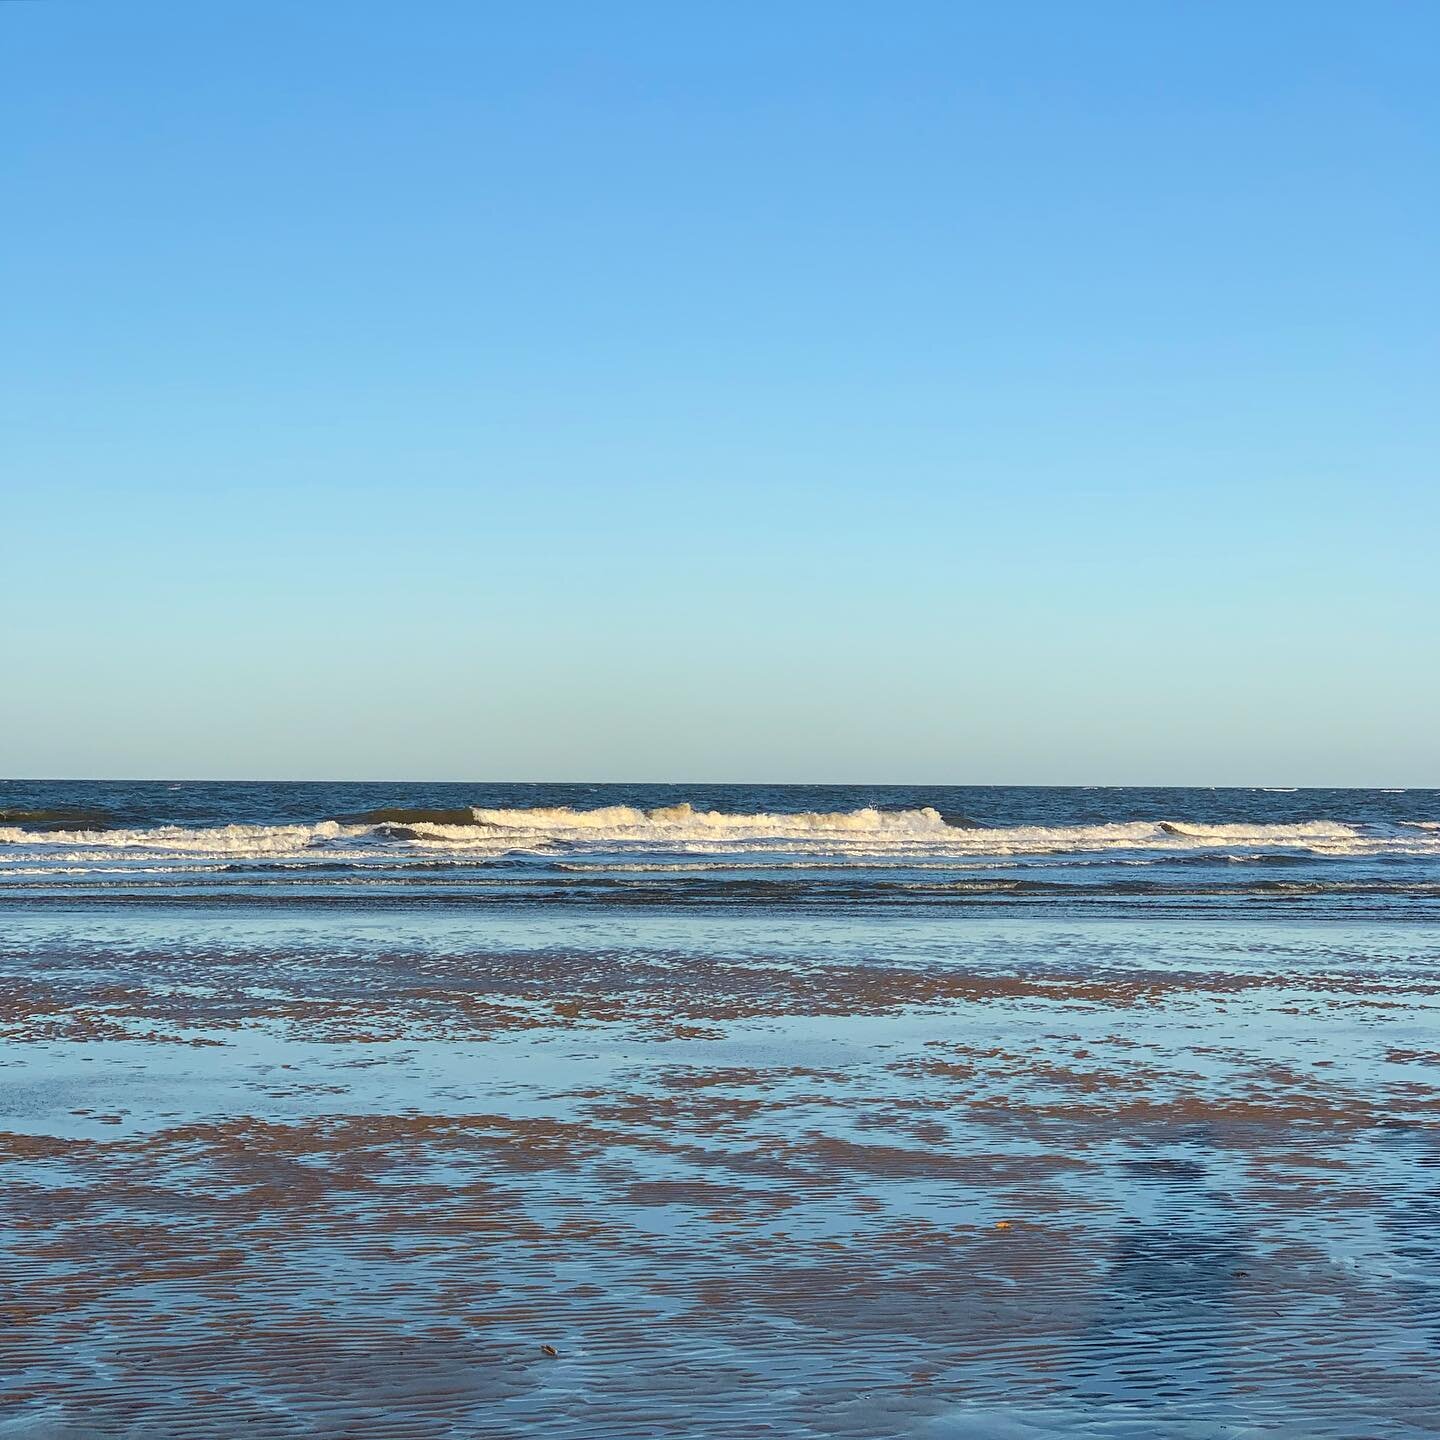 A bit of vitamin sea (and D) to brighten the way into 2020 💙 #Brancaster #brancasterbeach #beachlife #newyear #vitaminsea #stayatthewhitehouse #northnorfolk #winterbeach #headspace #andrelax #chicretreat #coolplaces #placestostay #getaway #escapetot